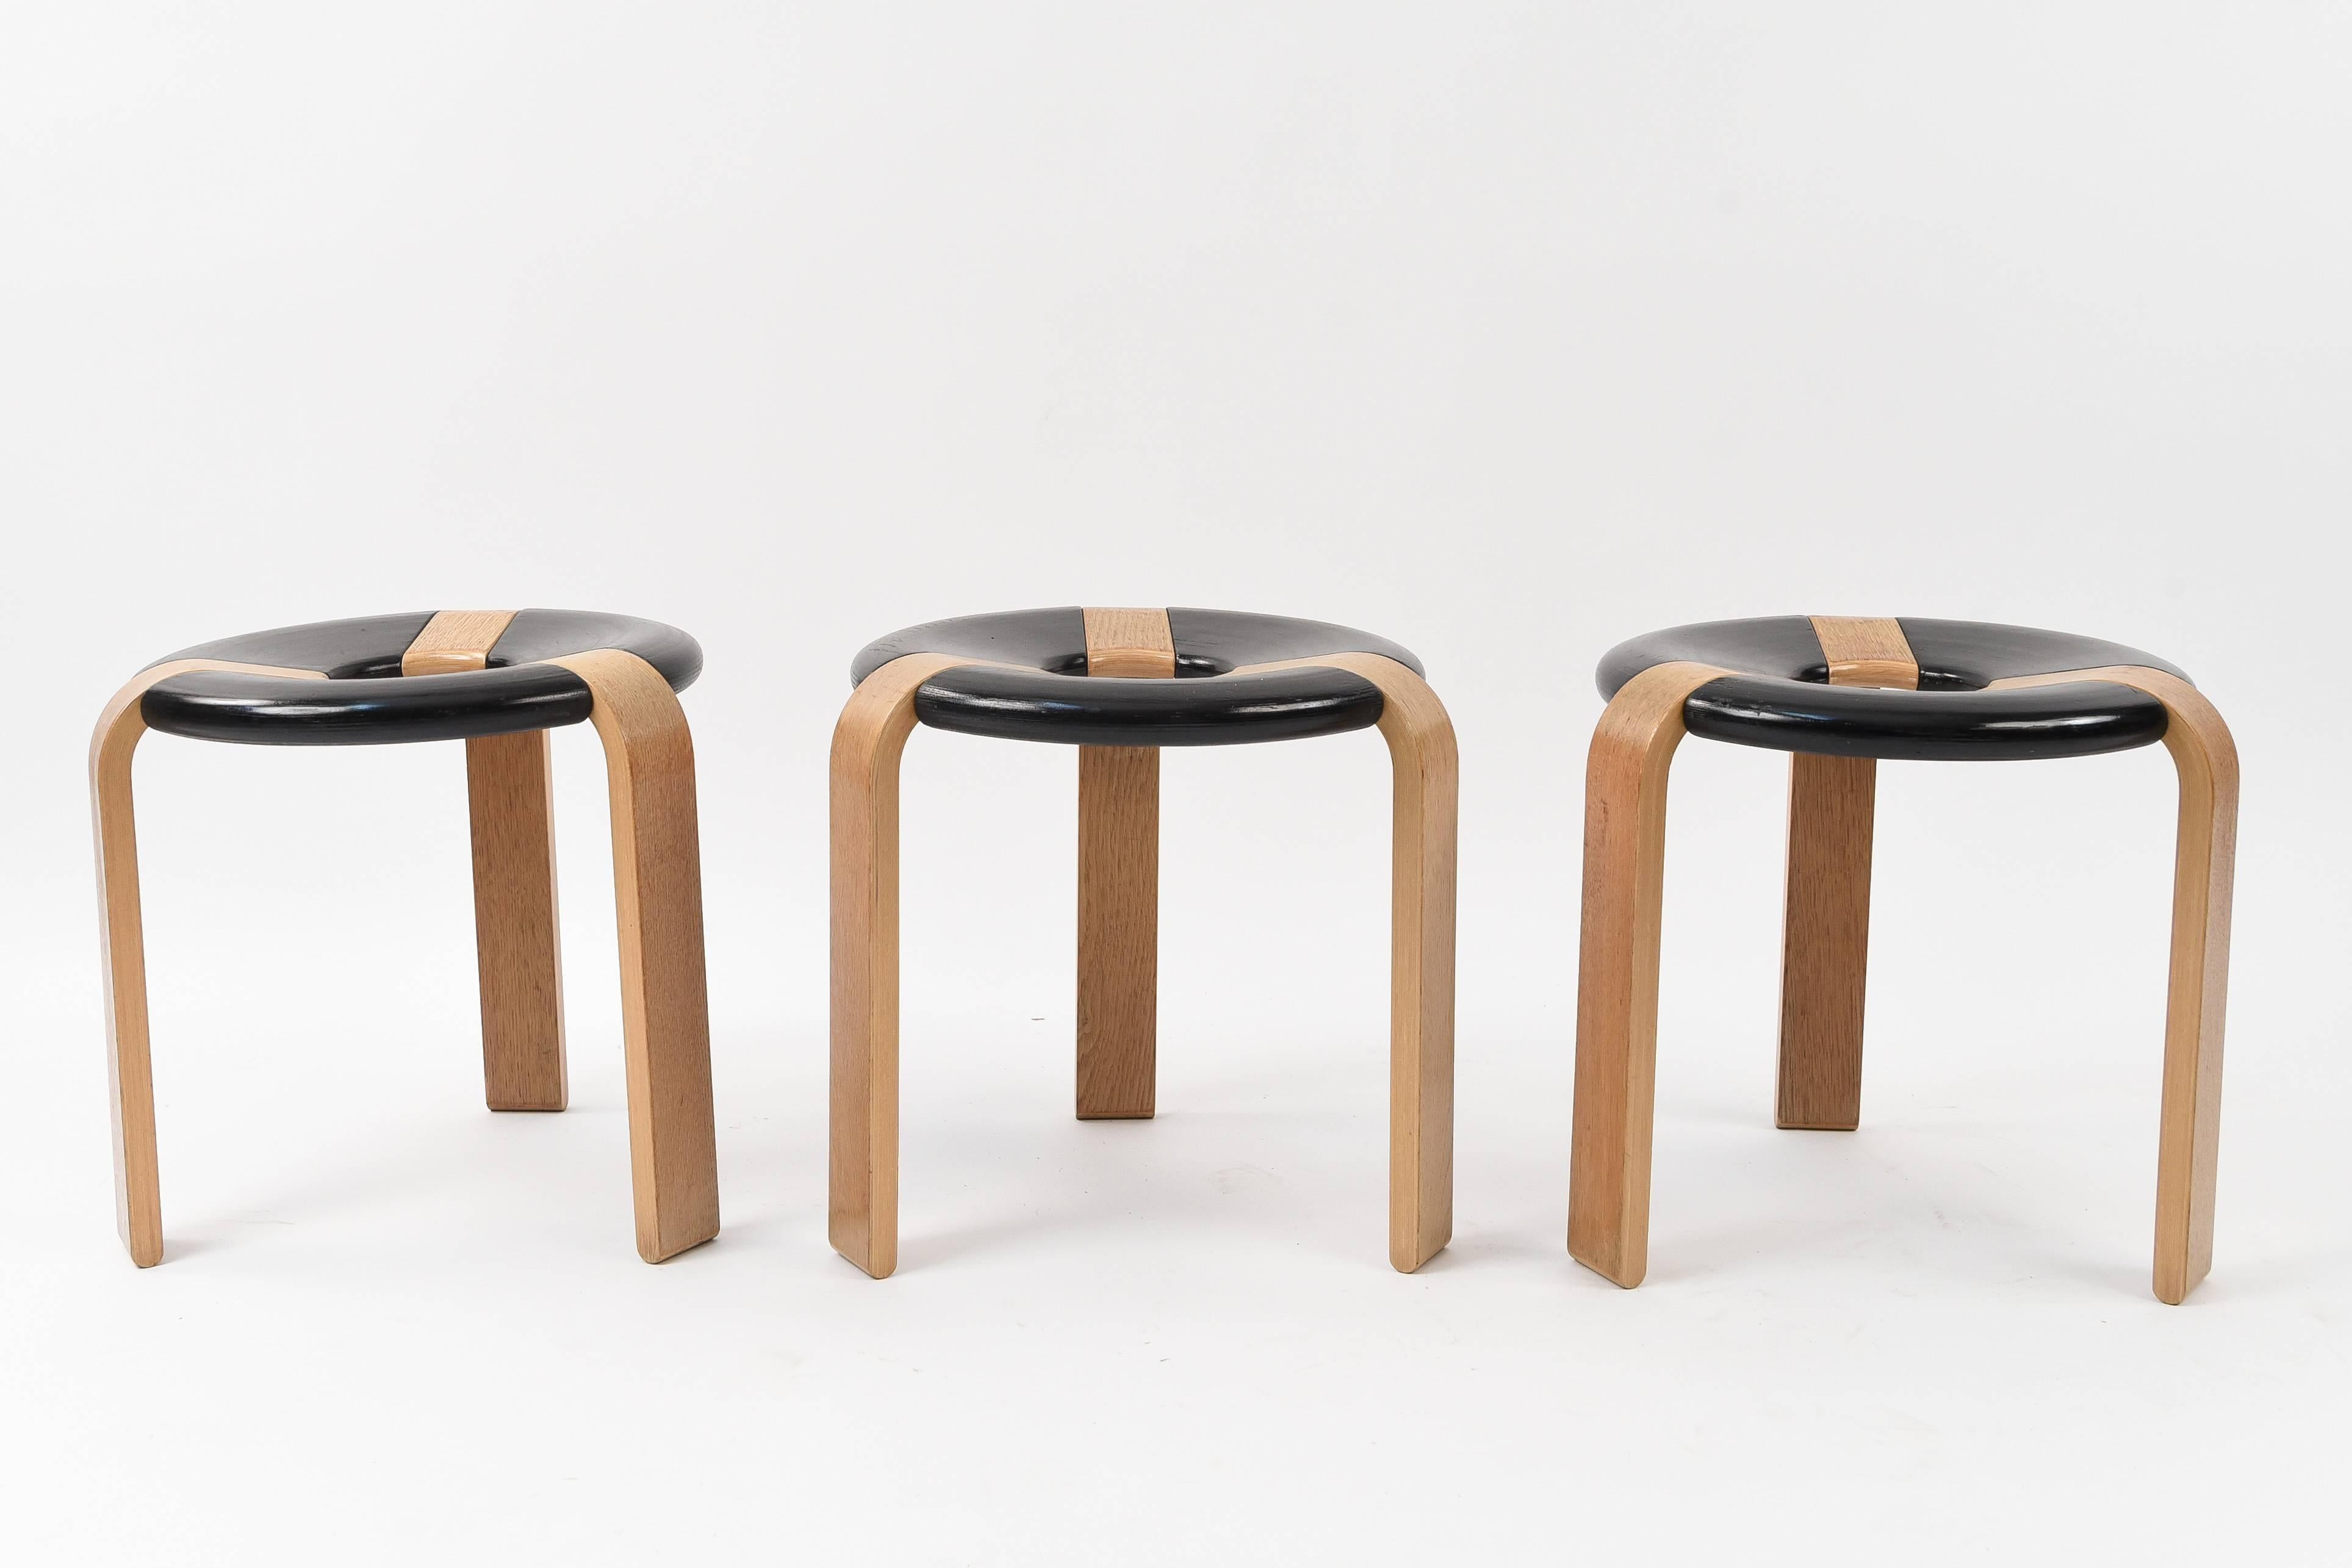 A great set of three stools all together! These rare stools in the wonderful circular design are hard to find by themselves let alone in a group like this!